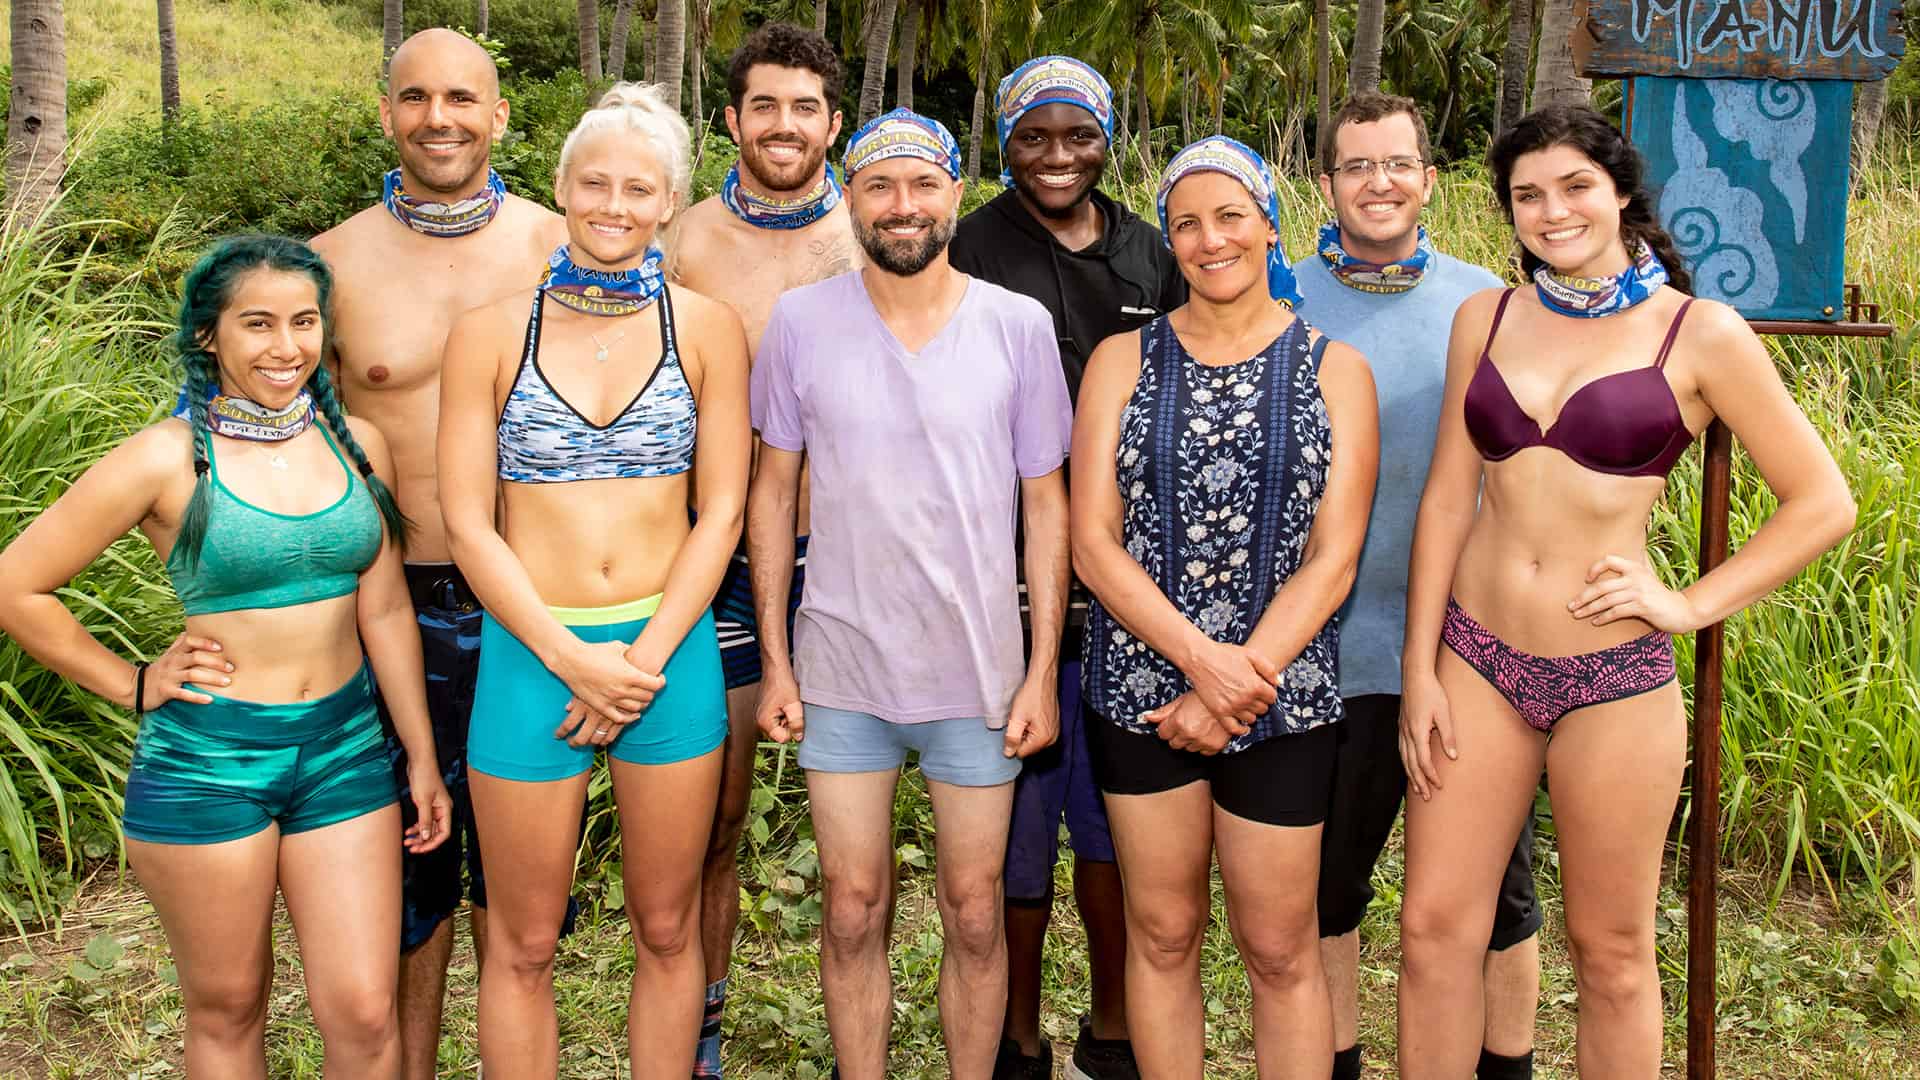 Survivor Scripted: Fake Reality Shows
